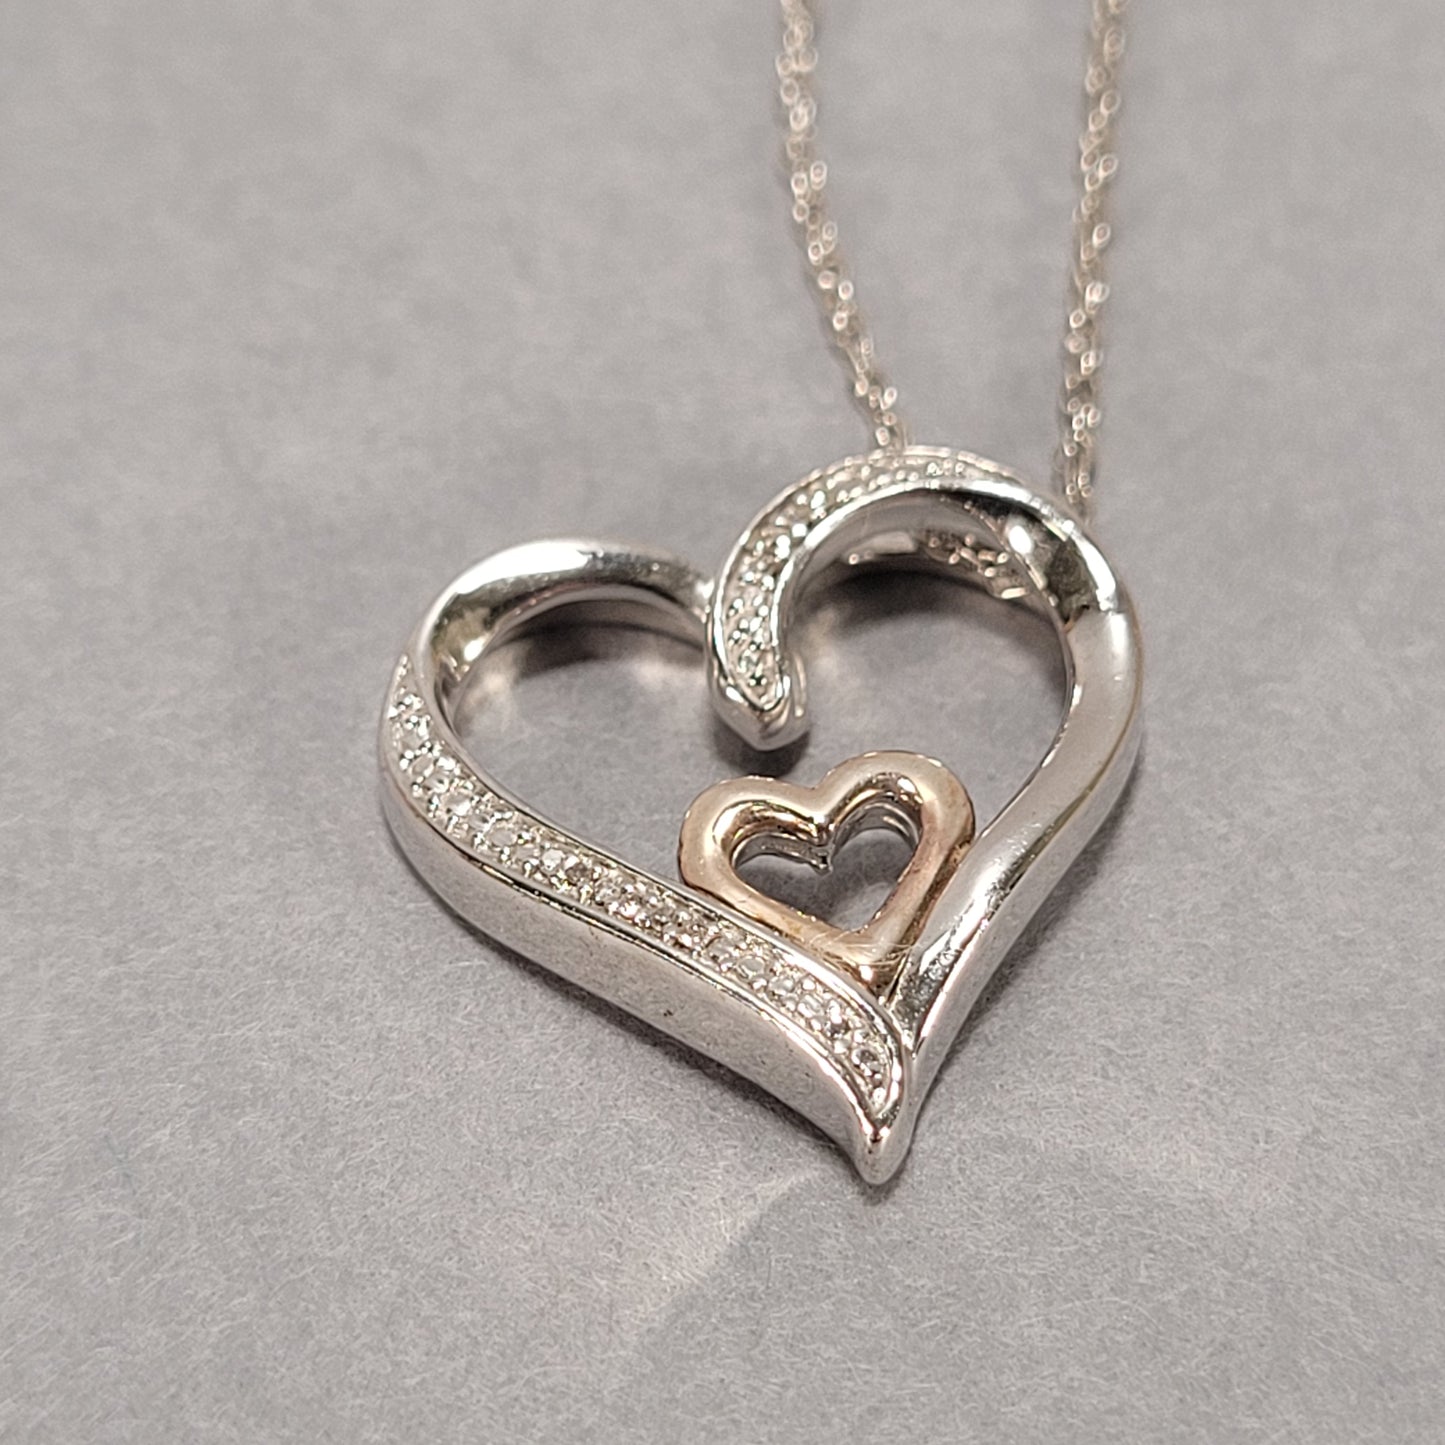 18" Sterling Silver Necklace and Heart Charm with Gold Plating and Small Diamonds